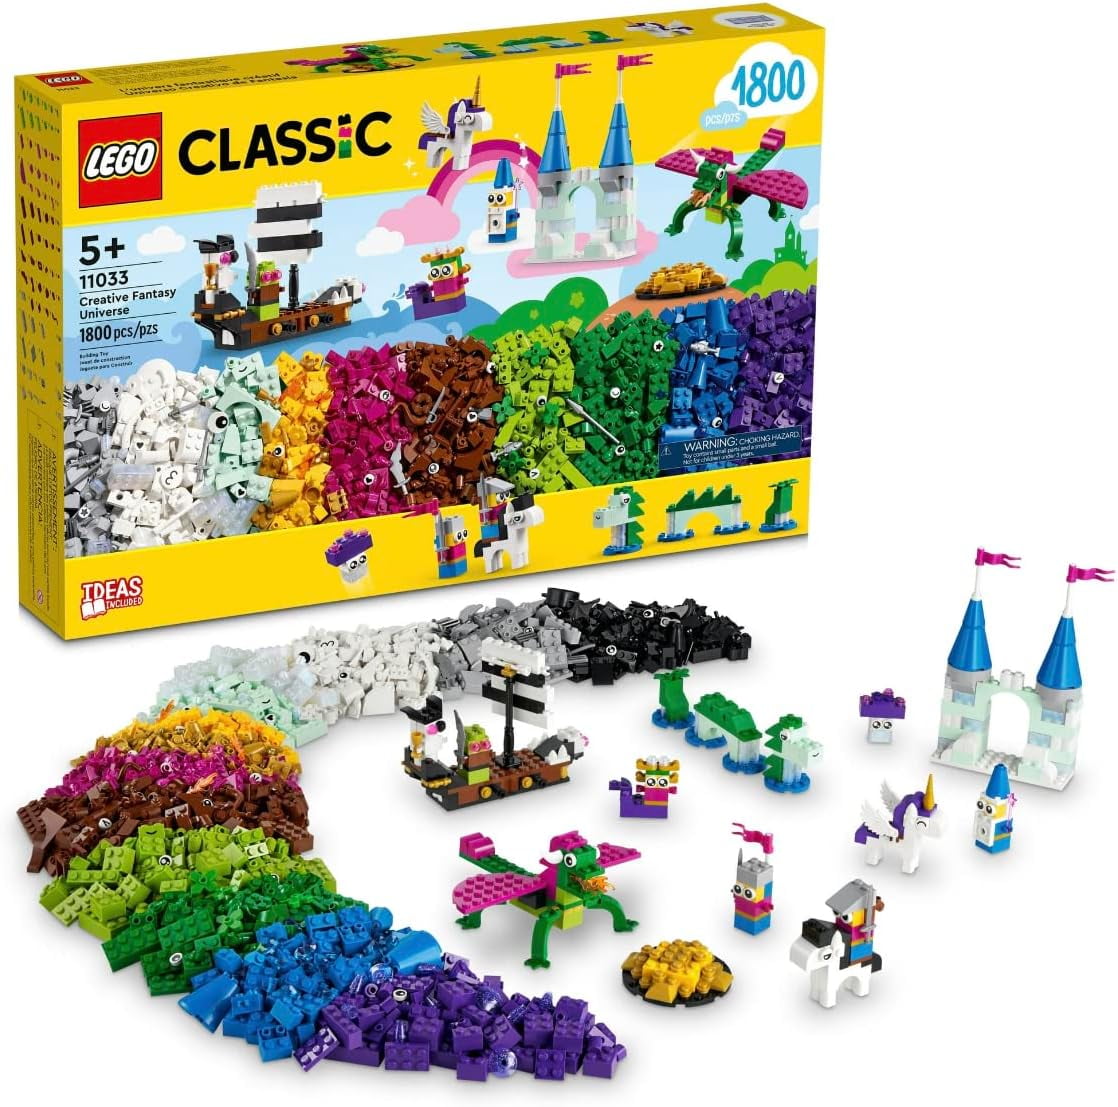 LEGO Classic Creative Fantasy Universe Set 11033, Building Adventure for  Imaginative Play with Unicorn Toy, Castle, Dragon and Pirate Ship Builds